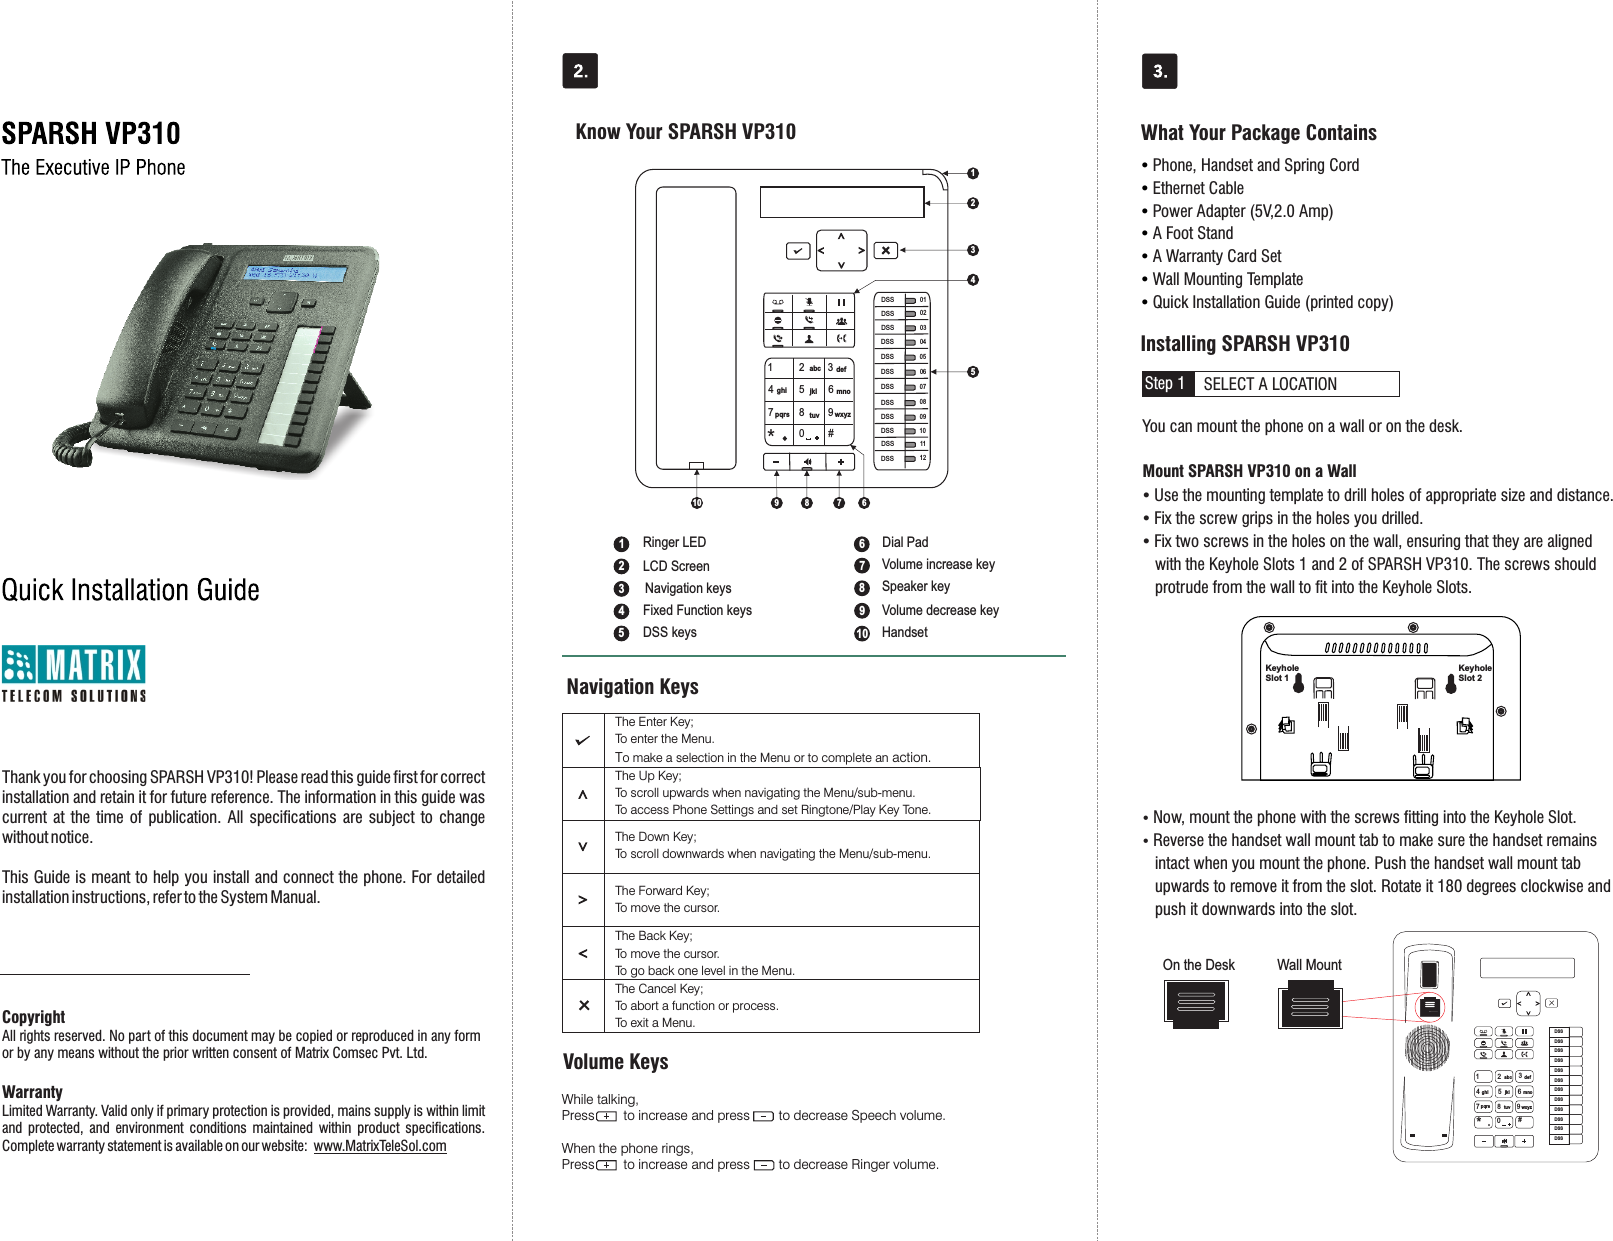 Thank you for choosing SPARSH VP310! Please read this guide first for correct installation and retain it for future reference. The information in this guide was current  at  the time  of  publication.  All  specifications  are  subject  to  change without notice.This Guide is meant to help you install and connect the phone. For detailed installation instructions, refer to the System Manual.CopyrightAll rights reserved. No part of this document may be copied or reproduced in any form or by any means without the prior written consent of Matrix Comsec Pvt. Ltd.WarrantyLimited Warranty. Valid only if primary protection is provided, mains supply is within limit and  protected,  and  environment  conditions  maintained  within  product  specifications. Complete warranty statement is available on our website:  www.MatrixTeleSol.comSELECT A LOCATIONStep 1Ÿ Phone, Handset and Spring CordŸ Ethernet CableŸ Power Adapter (5V,2.0 Amp)Ÿ A Foot StandŸ A Warranty Card SetŸ Wall Mounting TemplateŸ Quick Installation Guide (printed copy)Know Your SPARSH VP310 What Your Package ContainsInstalling SPARSH VP310You can mount the phone on a wall or on the desk.       Mount SPARSH VP310 on a WallŸ Use the mounting template to drill holes of appropriate size and distance. Ÿ Fix the screw grips in the holes you drilled. Ÿ Fix two screws in the holes on the wall, ensuring that they are aligned     with the Keyhole Slots 1 and 2 of SPARSH VP310. The screws should      protrude from the wall to fit into the Keyhole Slots.Ÿ Now, mount the phone with the screws fitting into the Keyhole Slot.Ÿ Reverse the handset wall mount tab to make sure the handset remains    intact when you mount the phone. Push the handset wall mount tab    upwards to remove it from the slot. Rotate it 180 degrees clockwise and    push it downwards into the slot. 8DSS01DSS12DSS02DSS03DSS04DSS05DSS06DSS07DSS08DSS09DSS10DSS111 2 345678 90*#abc defghi jkl mnopqrs tuv wxyz16Volume decrease keyVolume increase keySpeaker keyLCD ScreenRinger LEDFixed Function keysDial PadDSS keys12345789Navigation keysHandsetWhile talking,Press        to increase and press        to decrease Speech volume.When the phone rings,Press        to increase and press        to decrease Ringer volume.Volume KeysNavigation Keys The Enter Key;  To enter the Menu.  To make a selection in the Menu or to complete an action.   The Up Key;  To scroll upwards when navigating the Menu/sub-menu.  To access Phone Settings and set Ringtone/Play Key Tone.   The Down Key;  To scroll downwards when navigating the Menu/sub-menu.   The Forward Key;  To move the cursor.   The Back Key;  To move the cursor.  To go back one level in the Menu.   The Cancel Key;  To abort a function or process.  To exit a Menu. Keyhole Slot 2Keyhole Slot 157 69103421610Wall MountOn the DeskDSSDSSDSSDSSDSSDSSDSSDSSDSSDSSDSSDSS1 2 abc 3def4ghi 5jkl 6mno7pqrs 8tuv 9wxyz#*0